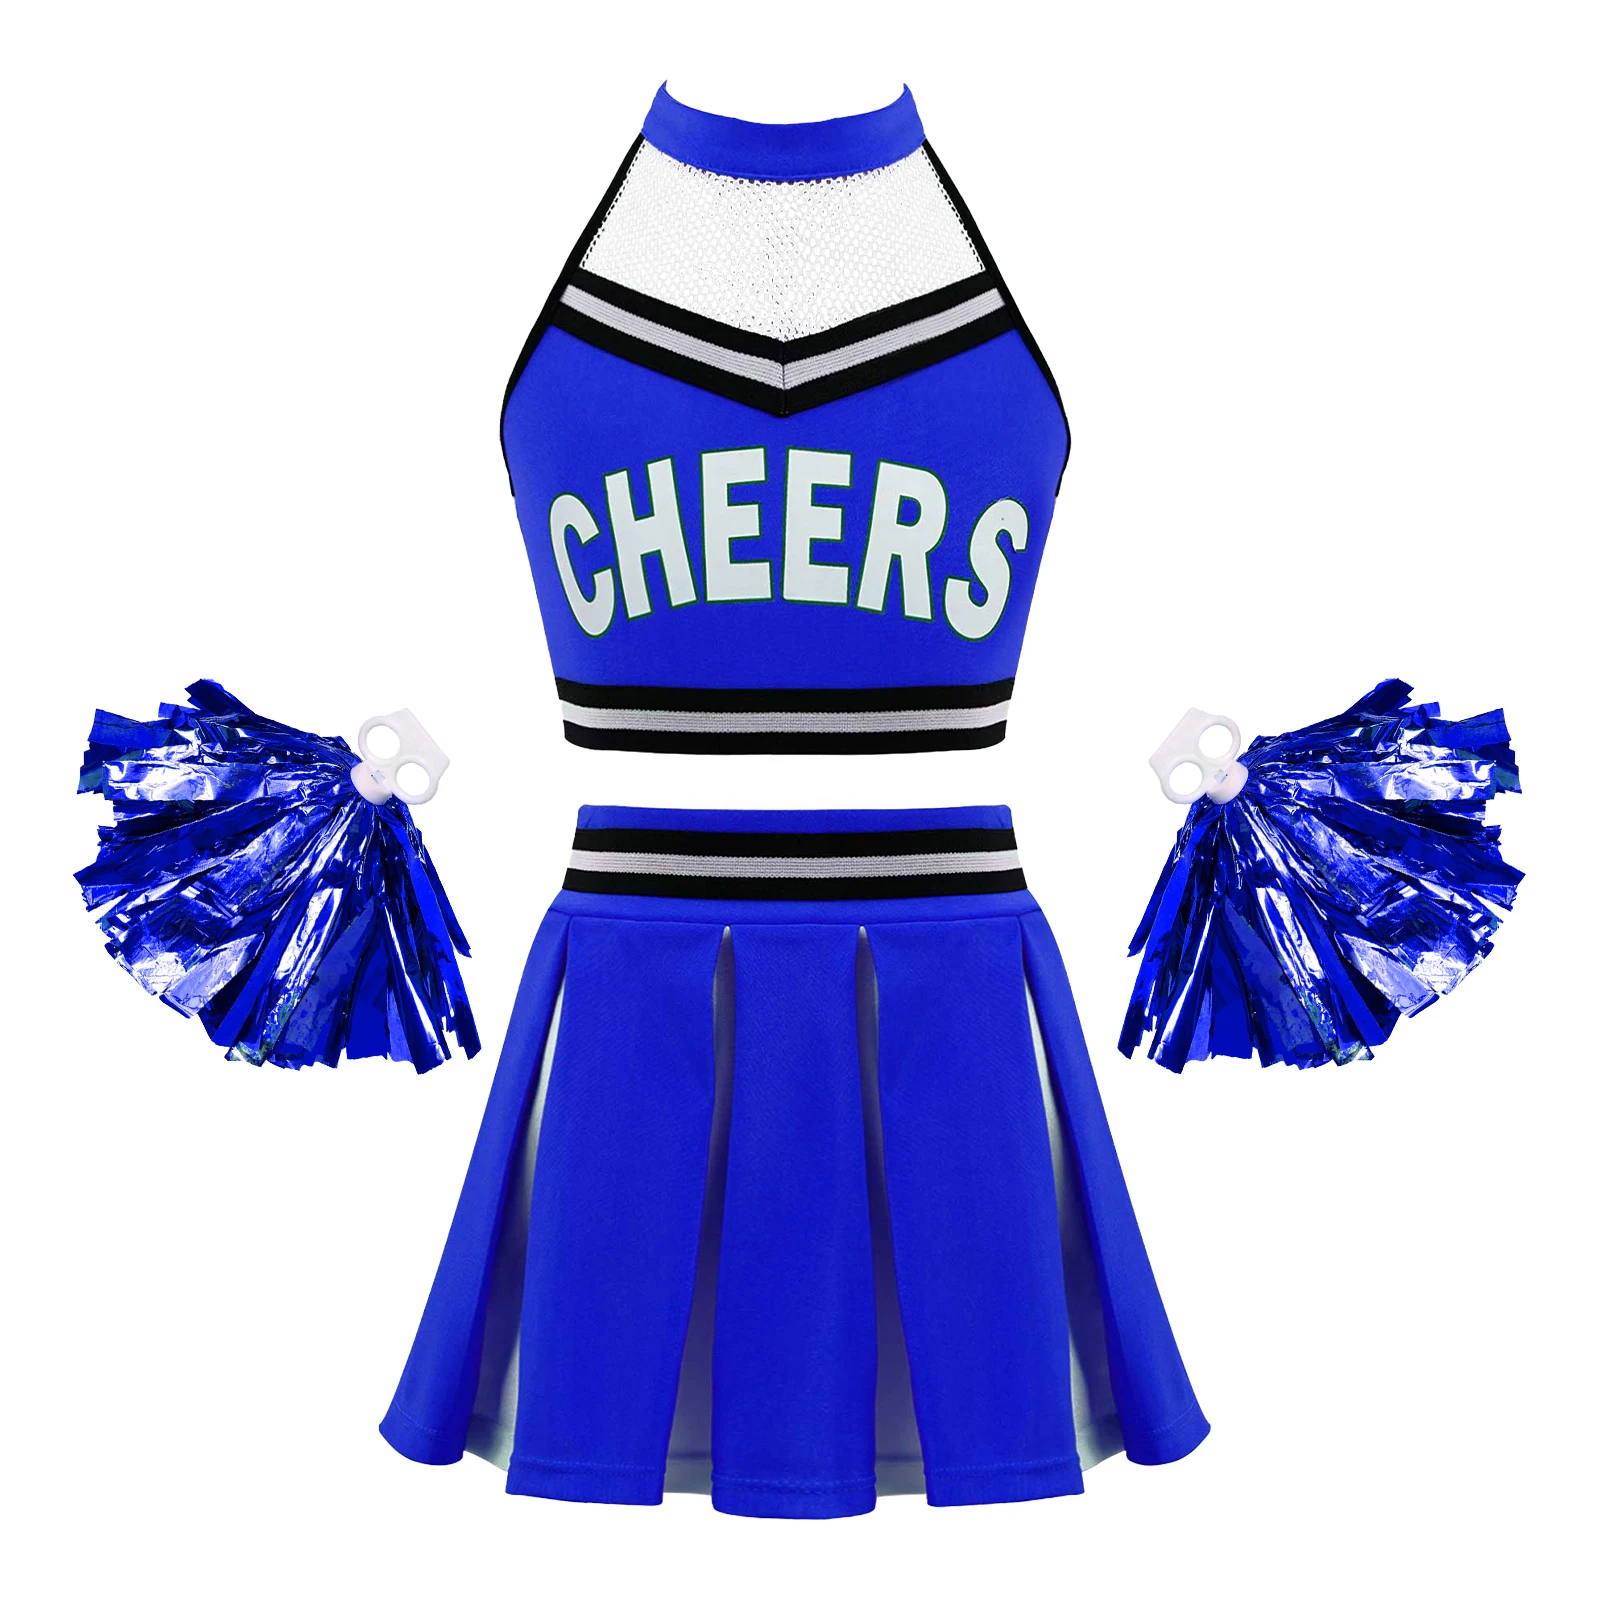 Kids School Girls Cheerleader Uniform Cosplay Costumes Sets for Themed Party Cheer Leader Stage Performance Dancing Outfits